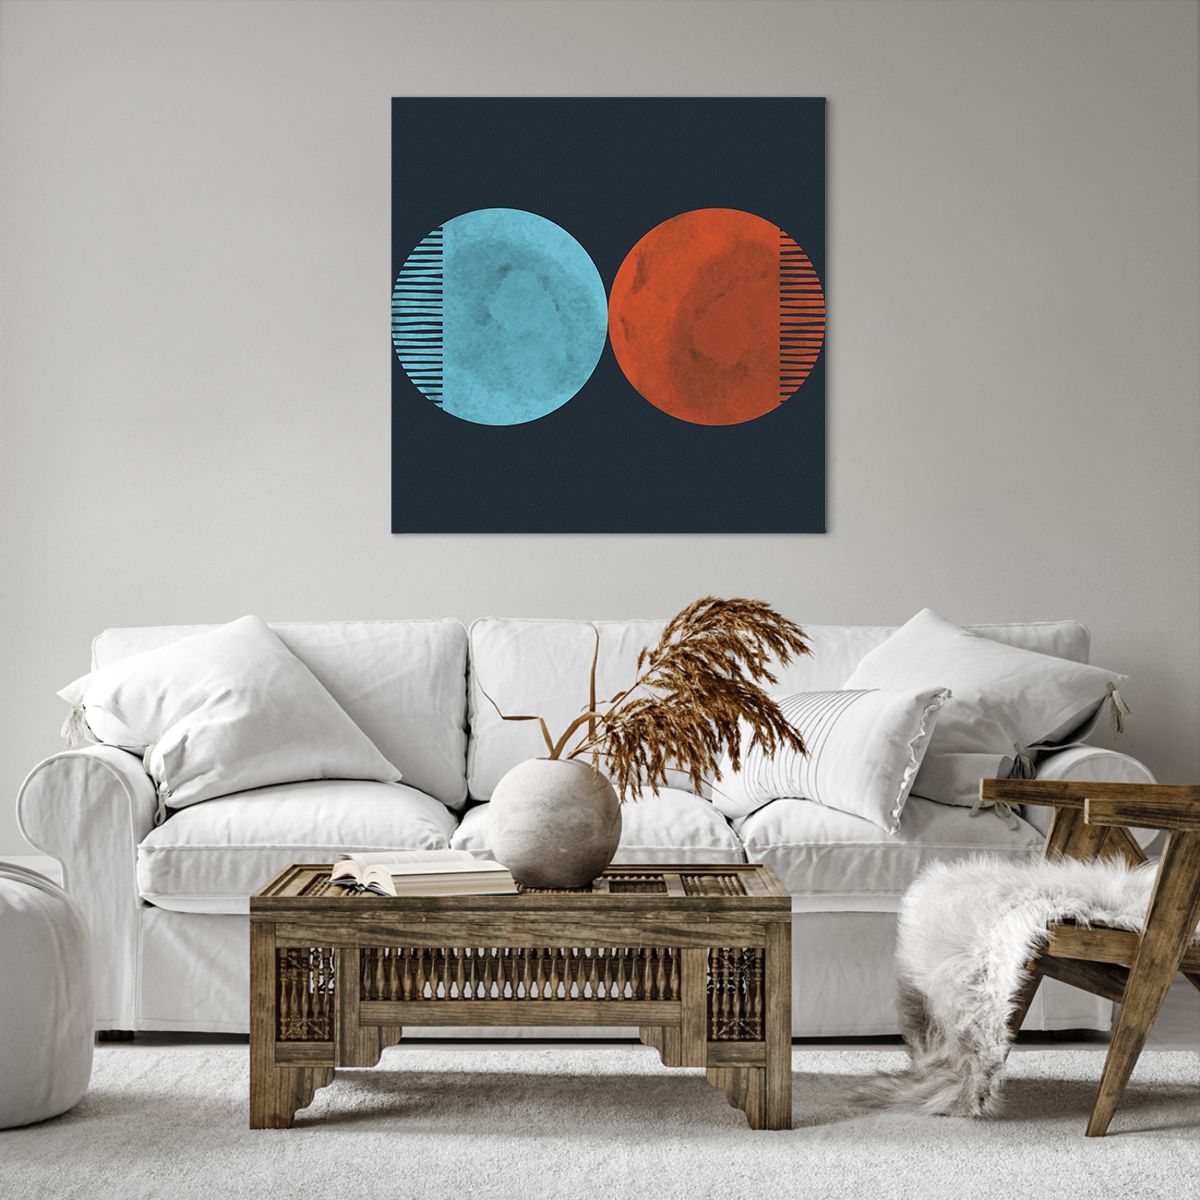 Canvas picture Abstraction, Canvas picture Art, Canvas picture Circles, Canvas picture Modern Art, Canvas picture Artistic Art